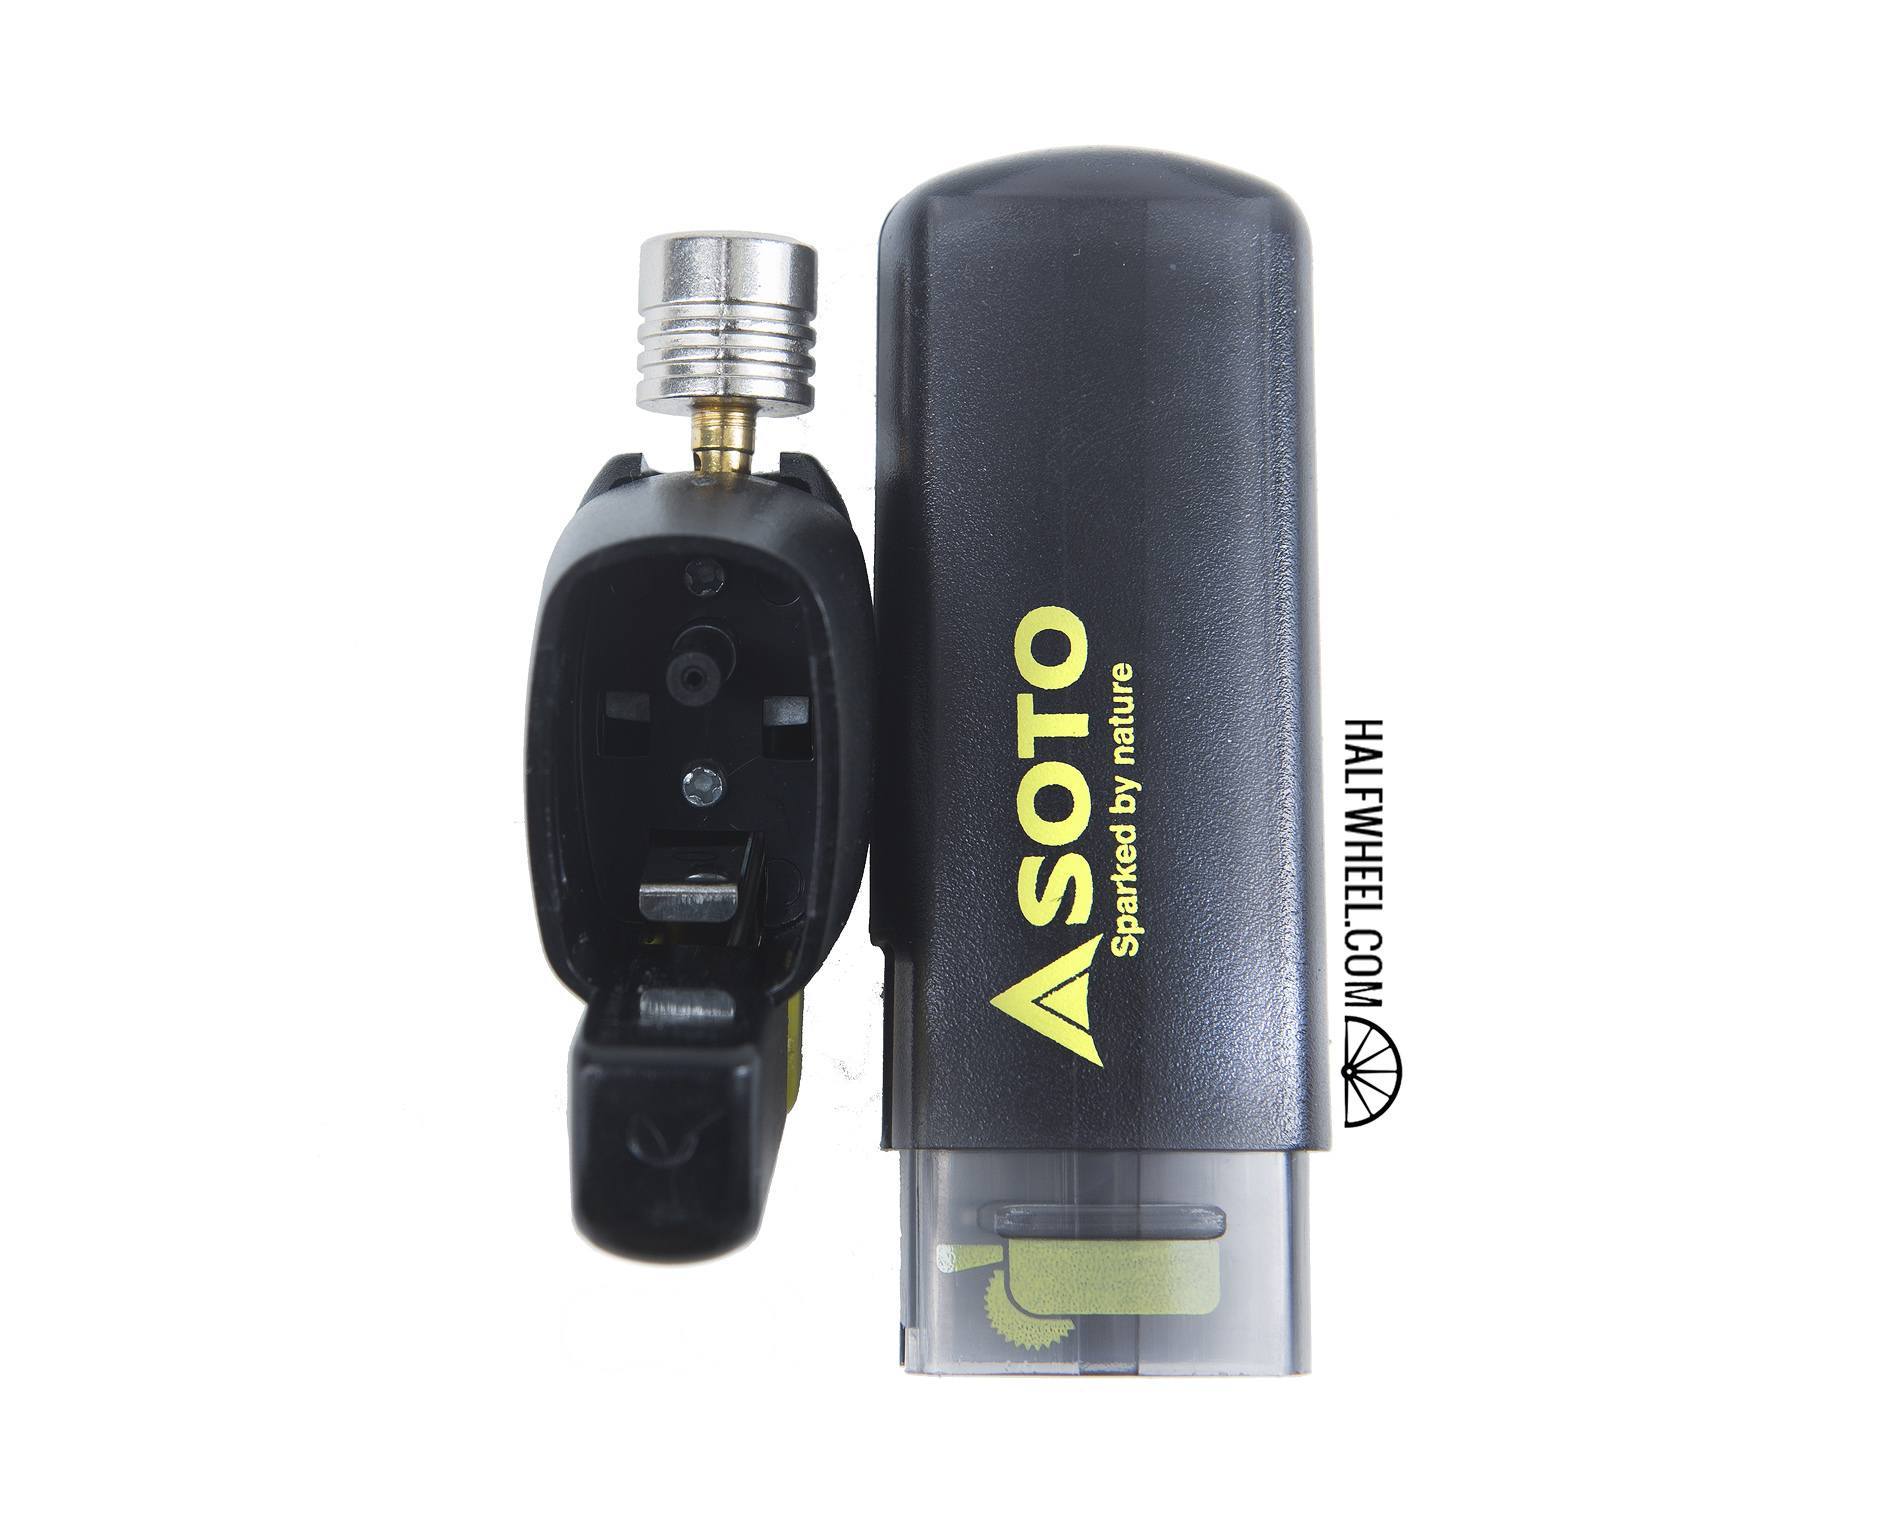 SOTO Outdoors PT 14SB Pocket Torch Assembly